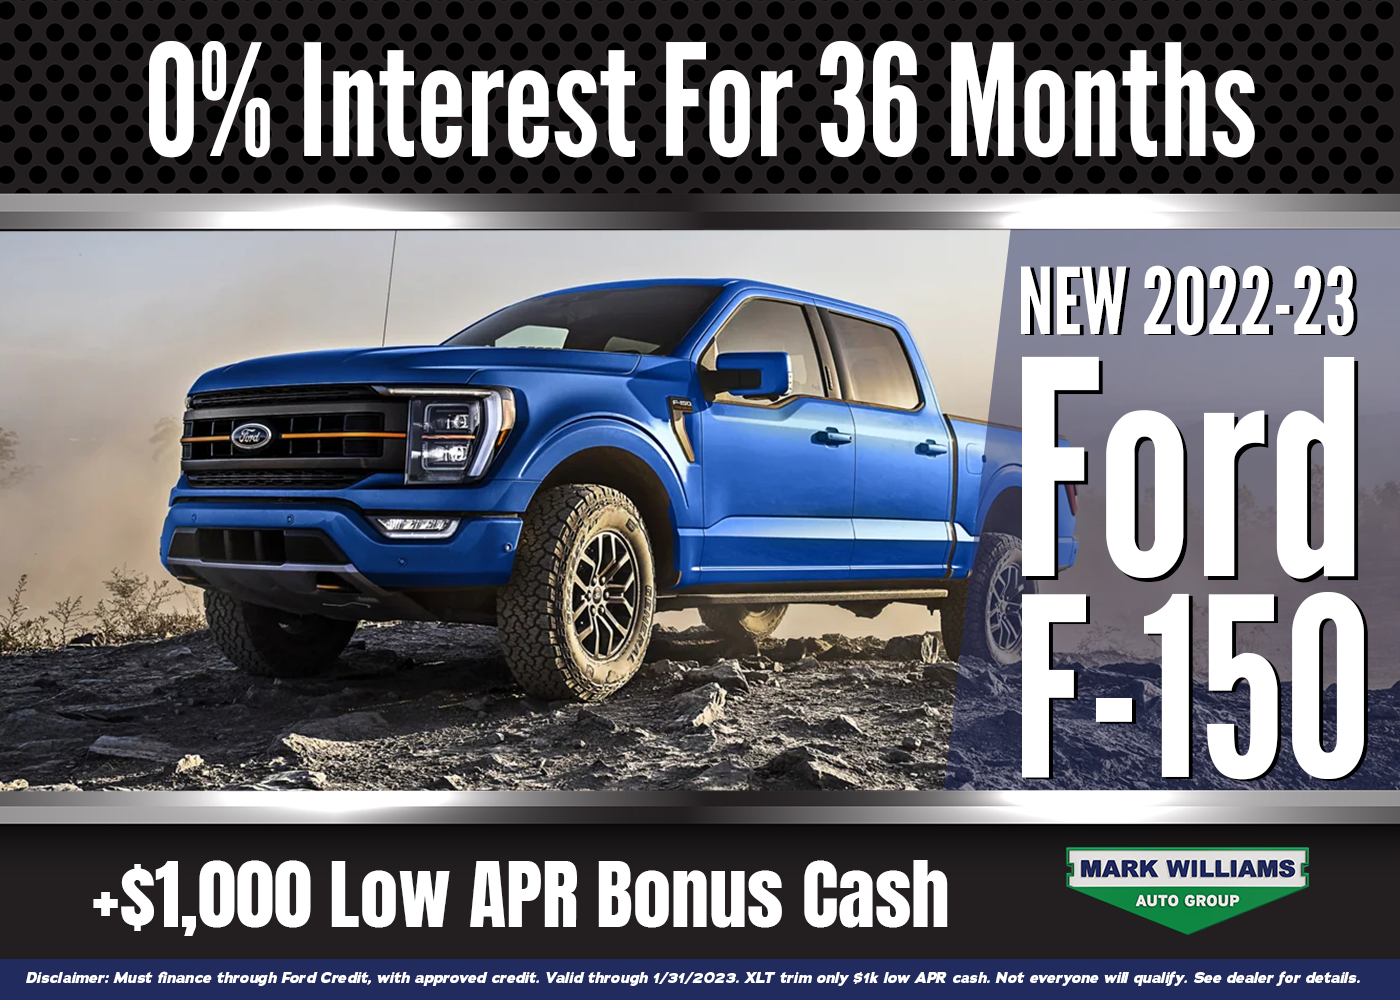 Ford Interest Rates F150